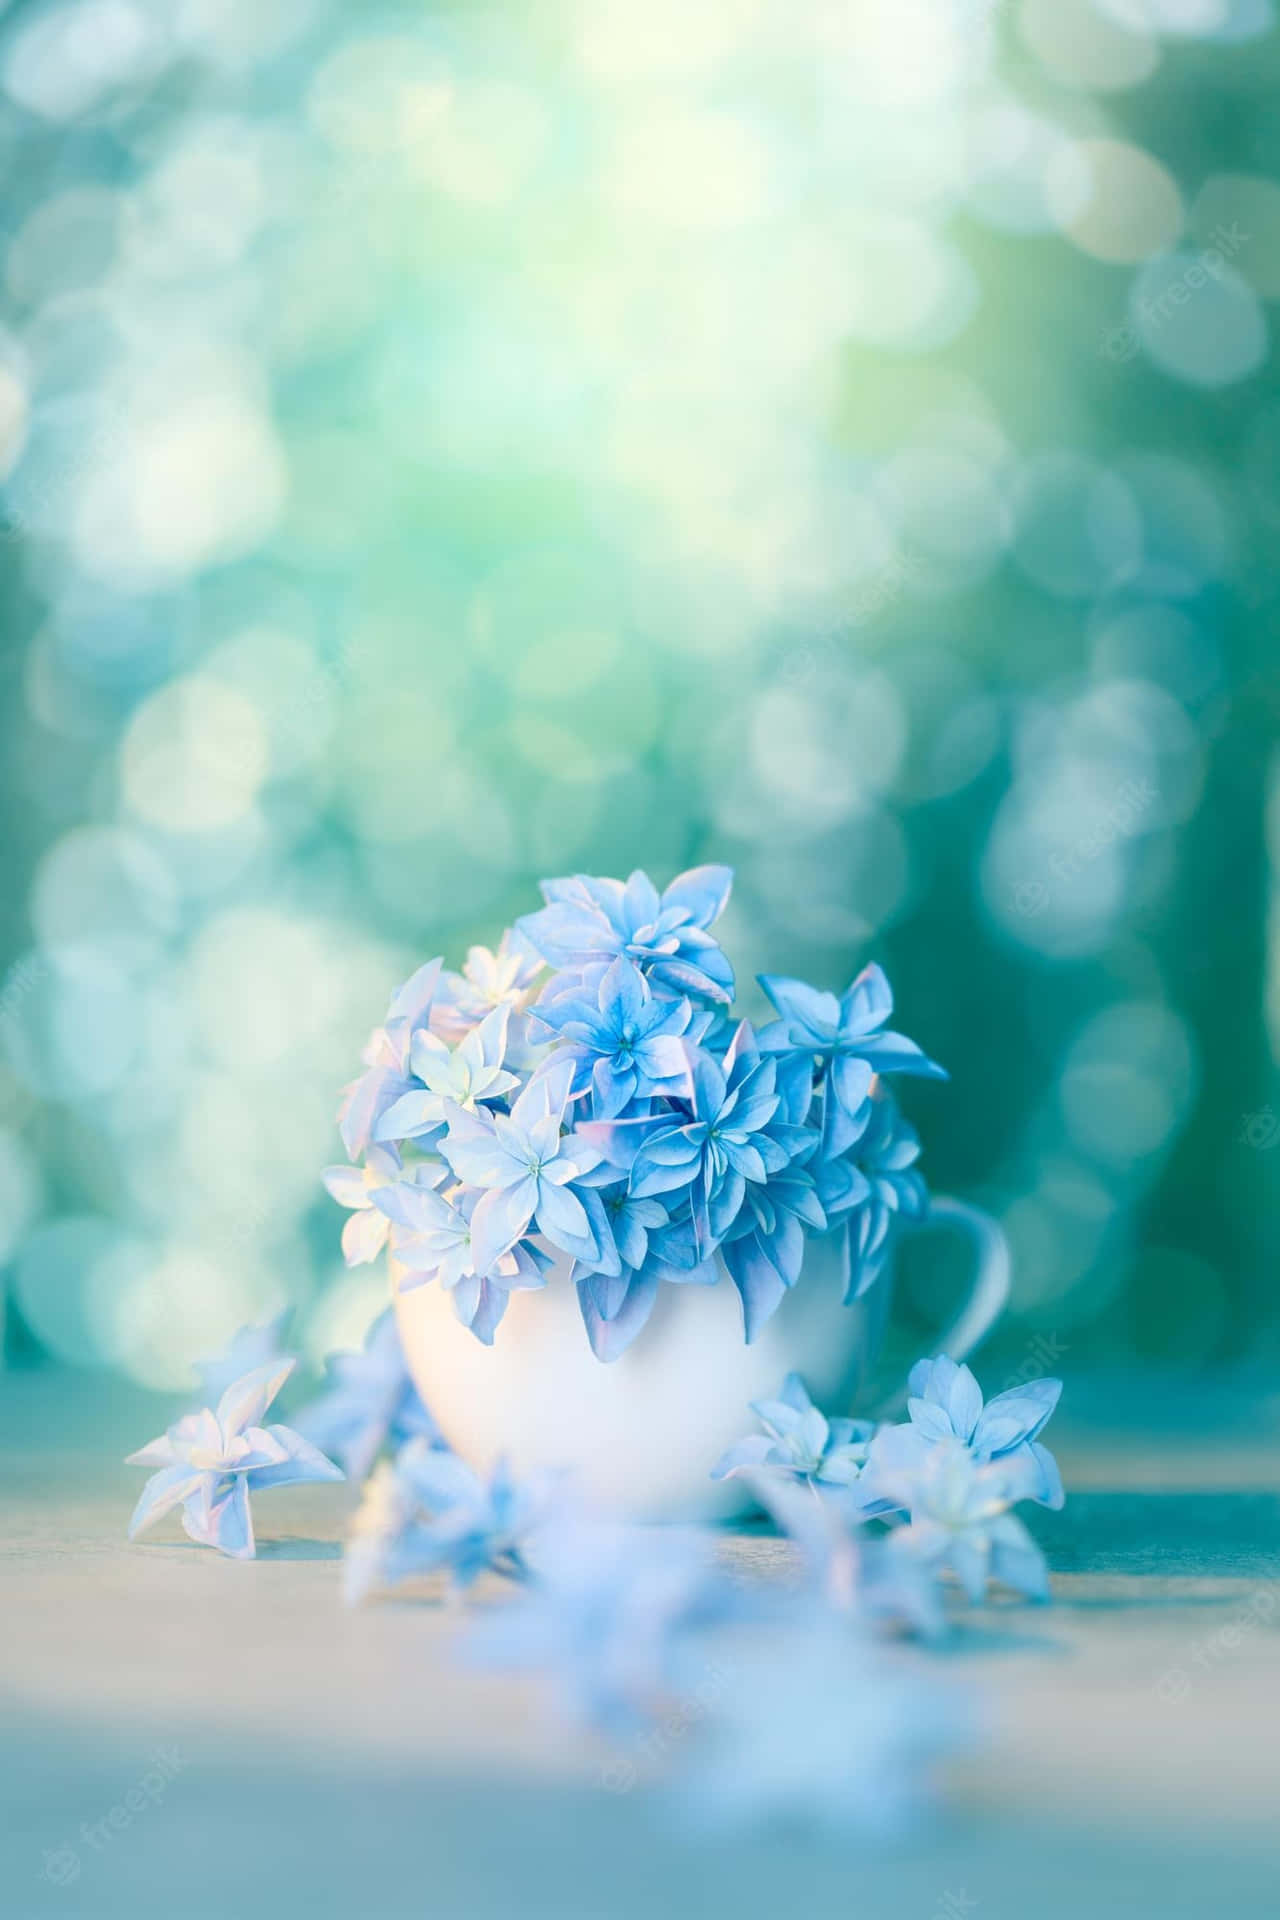 Blue Flowers In A Cup